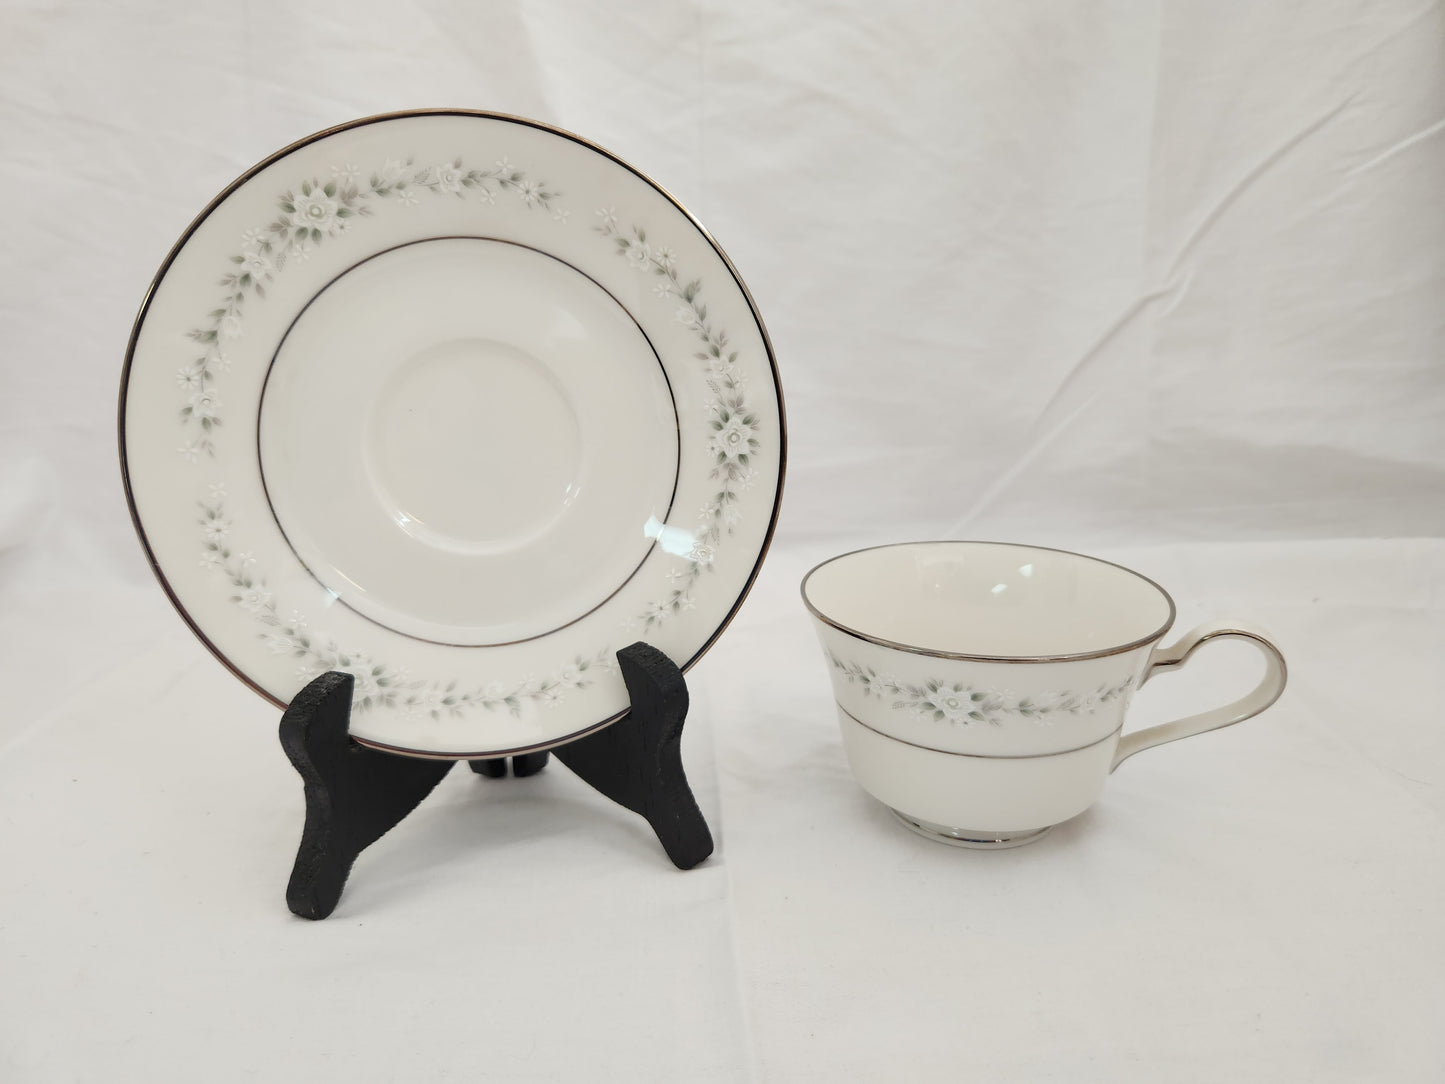 Noritake - Heather 7548 Footed Cup & Saucer Set